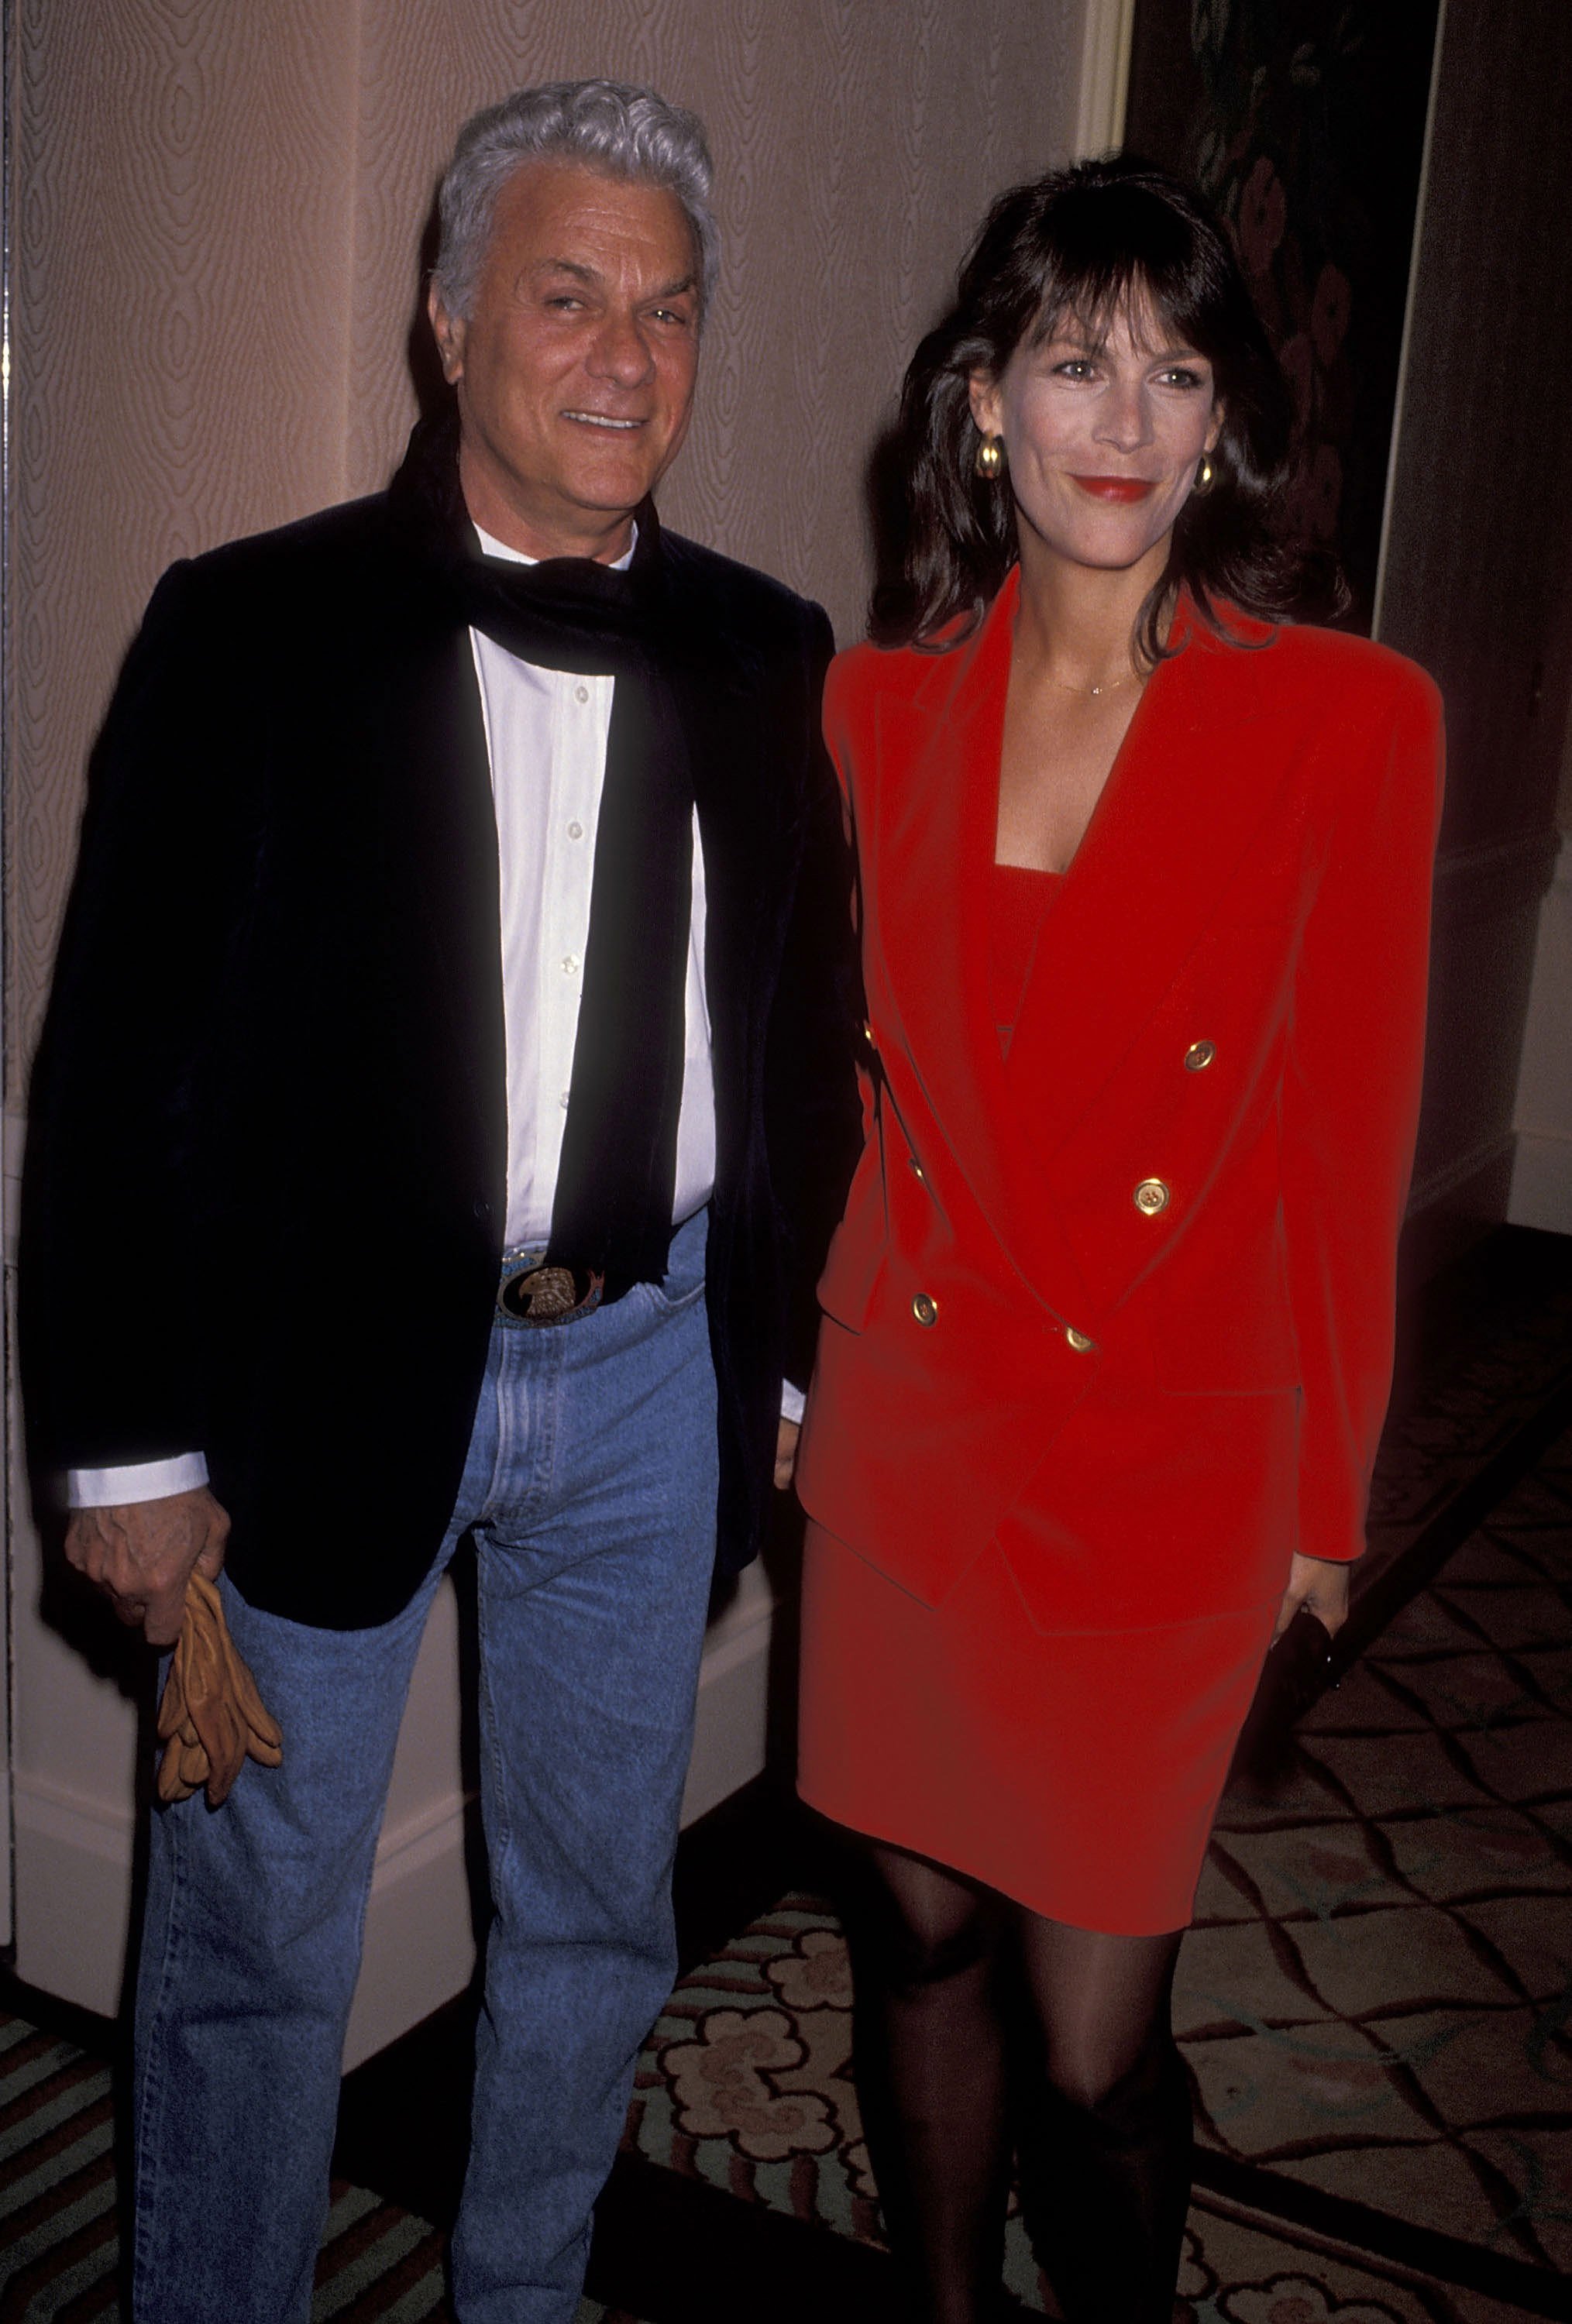 Tony Curtis and Jamie Lee Curtis attend the American Women in Radio & Television - Southern California Chapter's 36th Annual Genii Awards at Beverly Hills Hotel on May 30, 1991 in Beverly Hills, California ┃Source: Getty Images